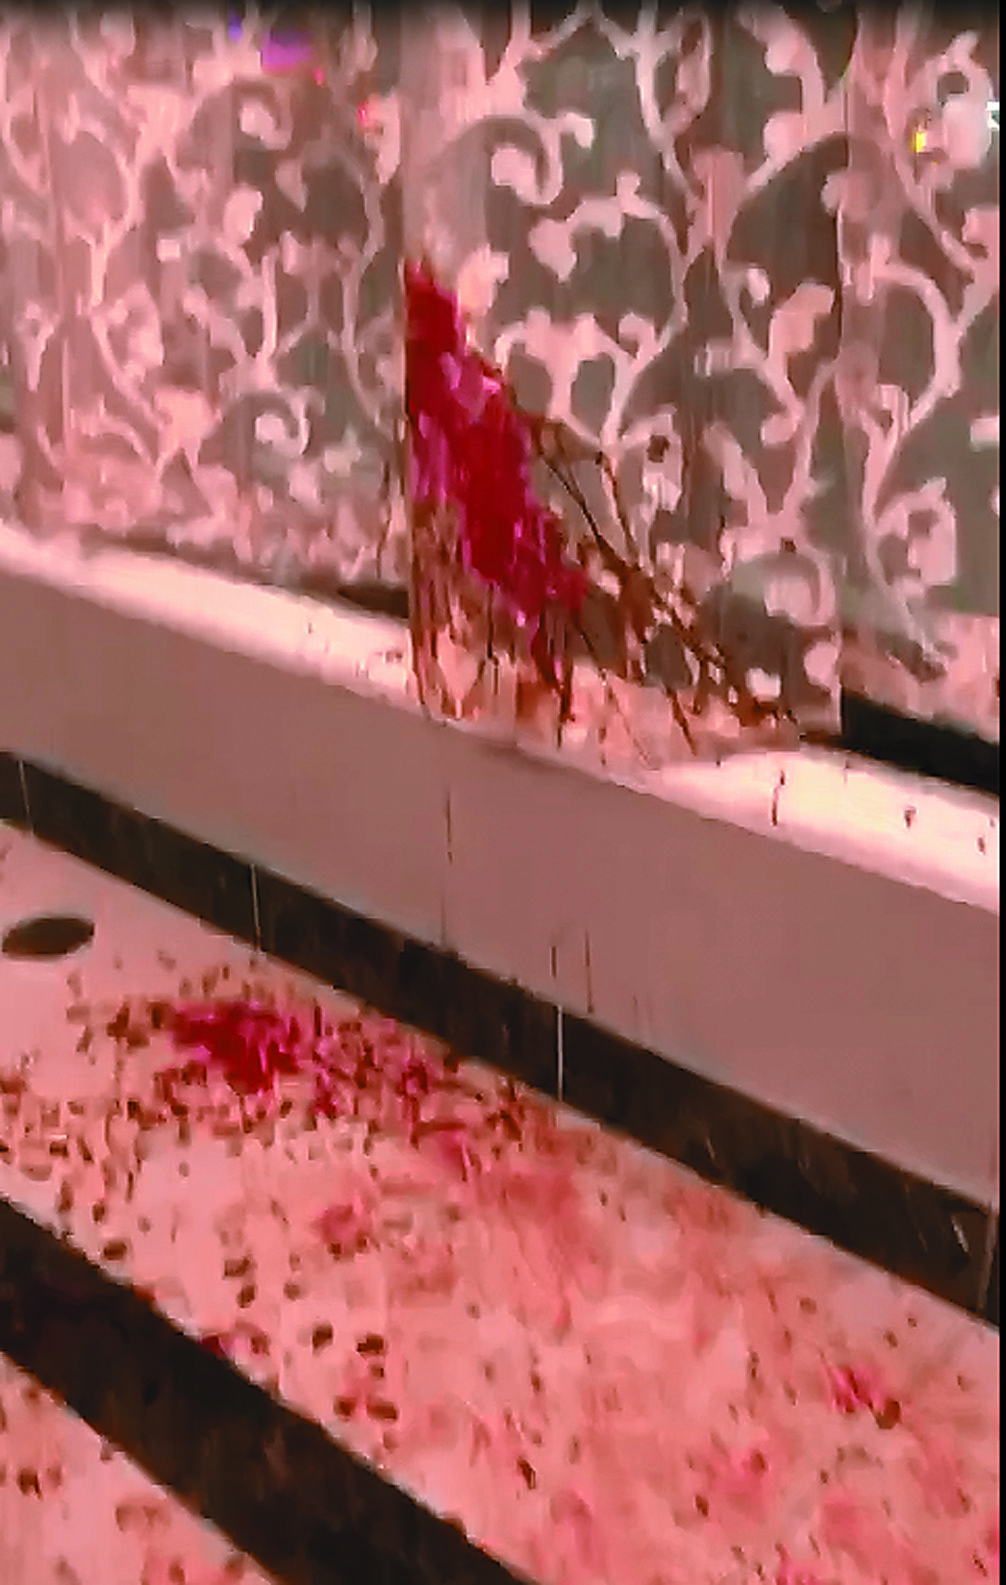 Bloody Scene inside the banquet hall where the stabbing took place